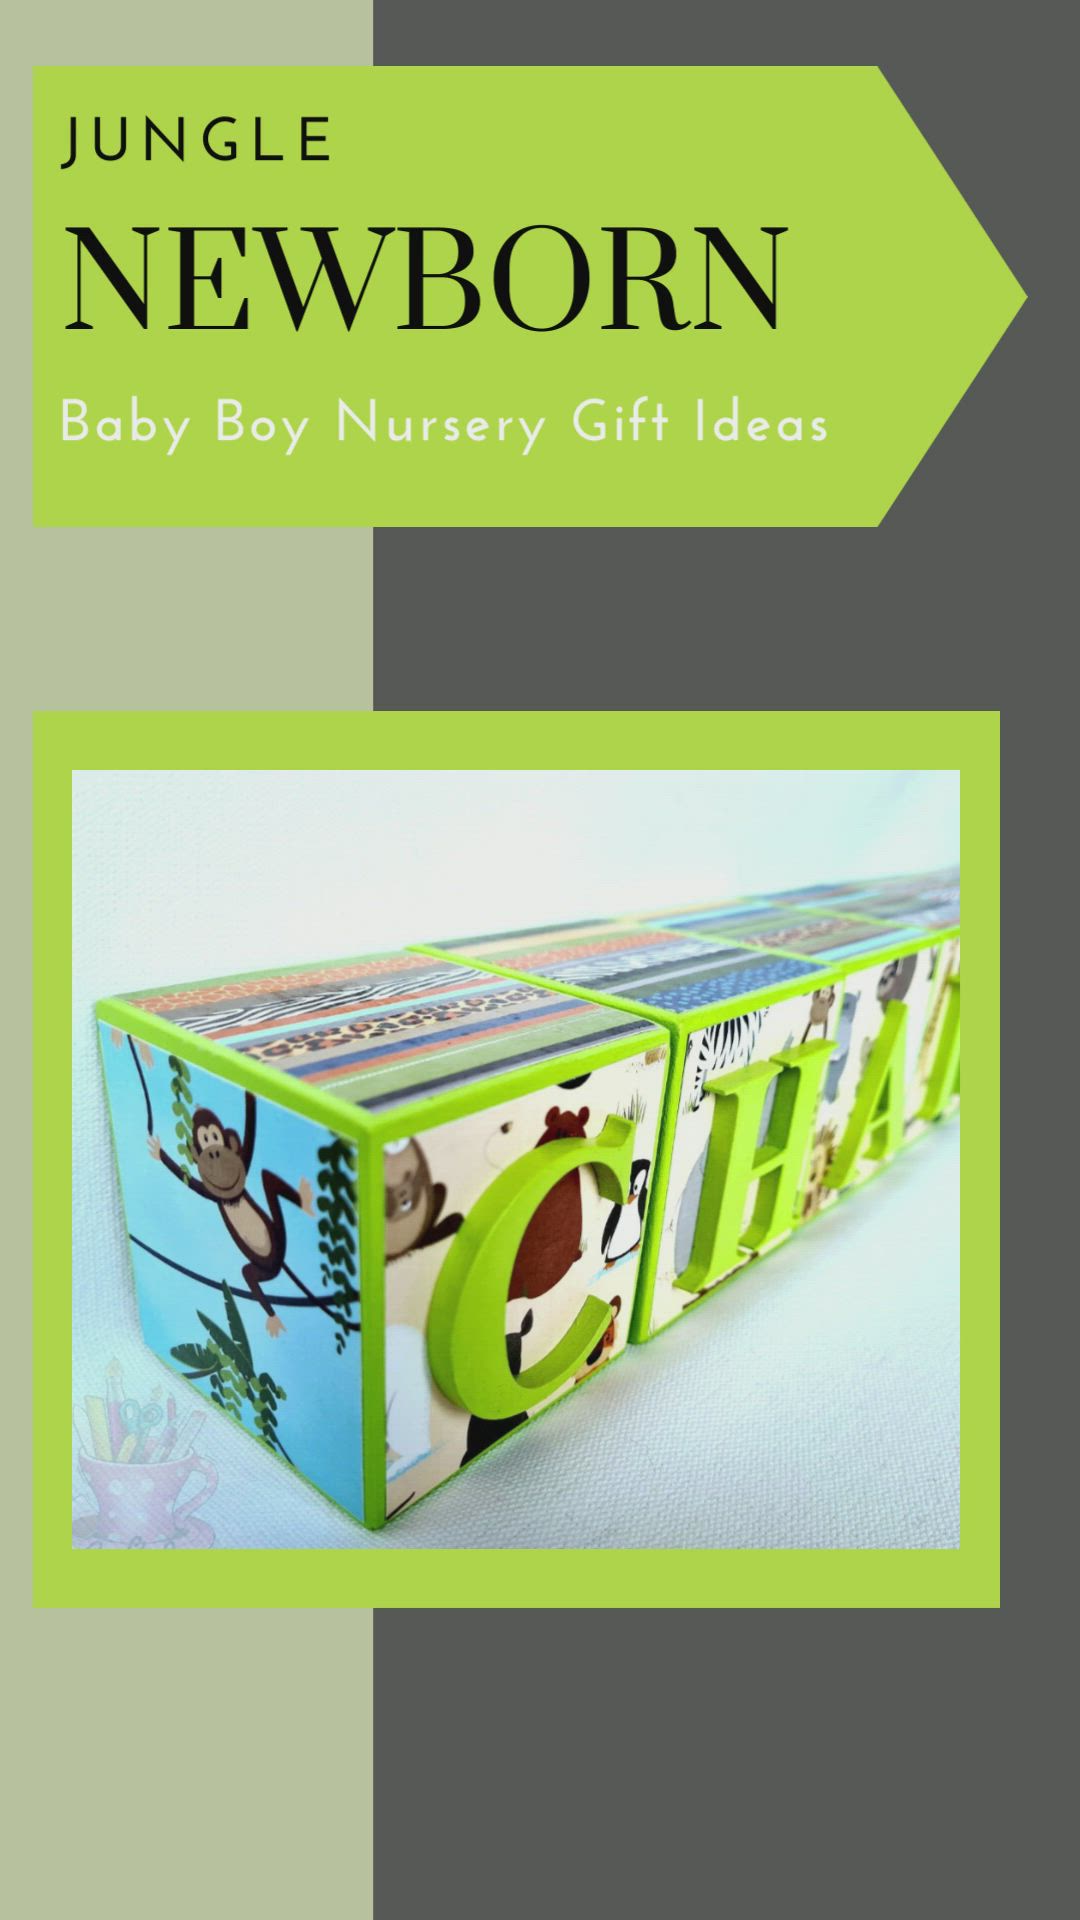 This may contain: a baby nursery gift box with an arrow pointing to the top and bottom, in green